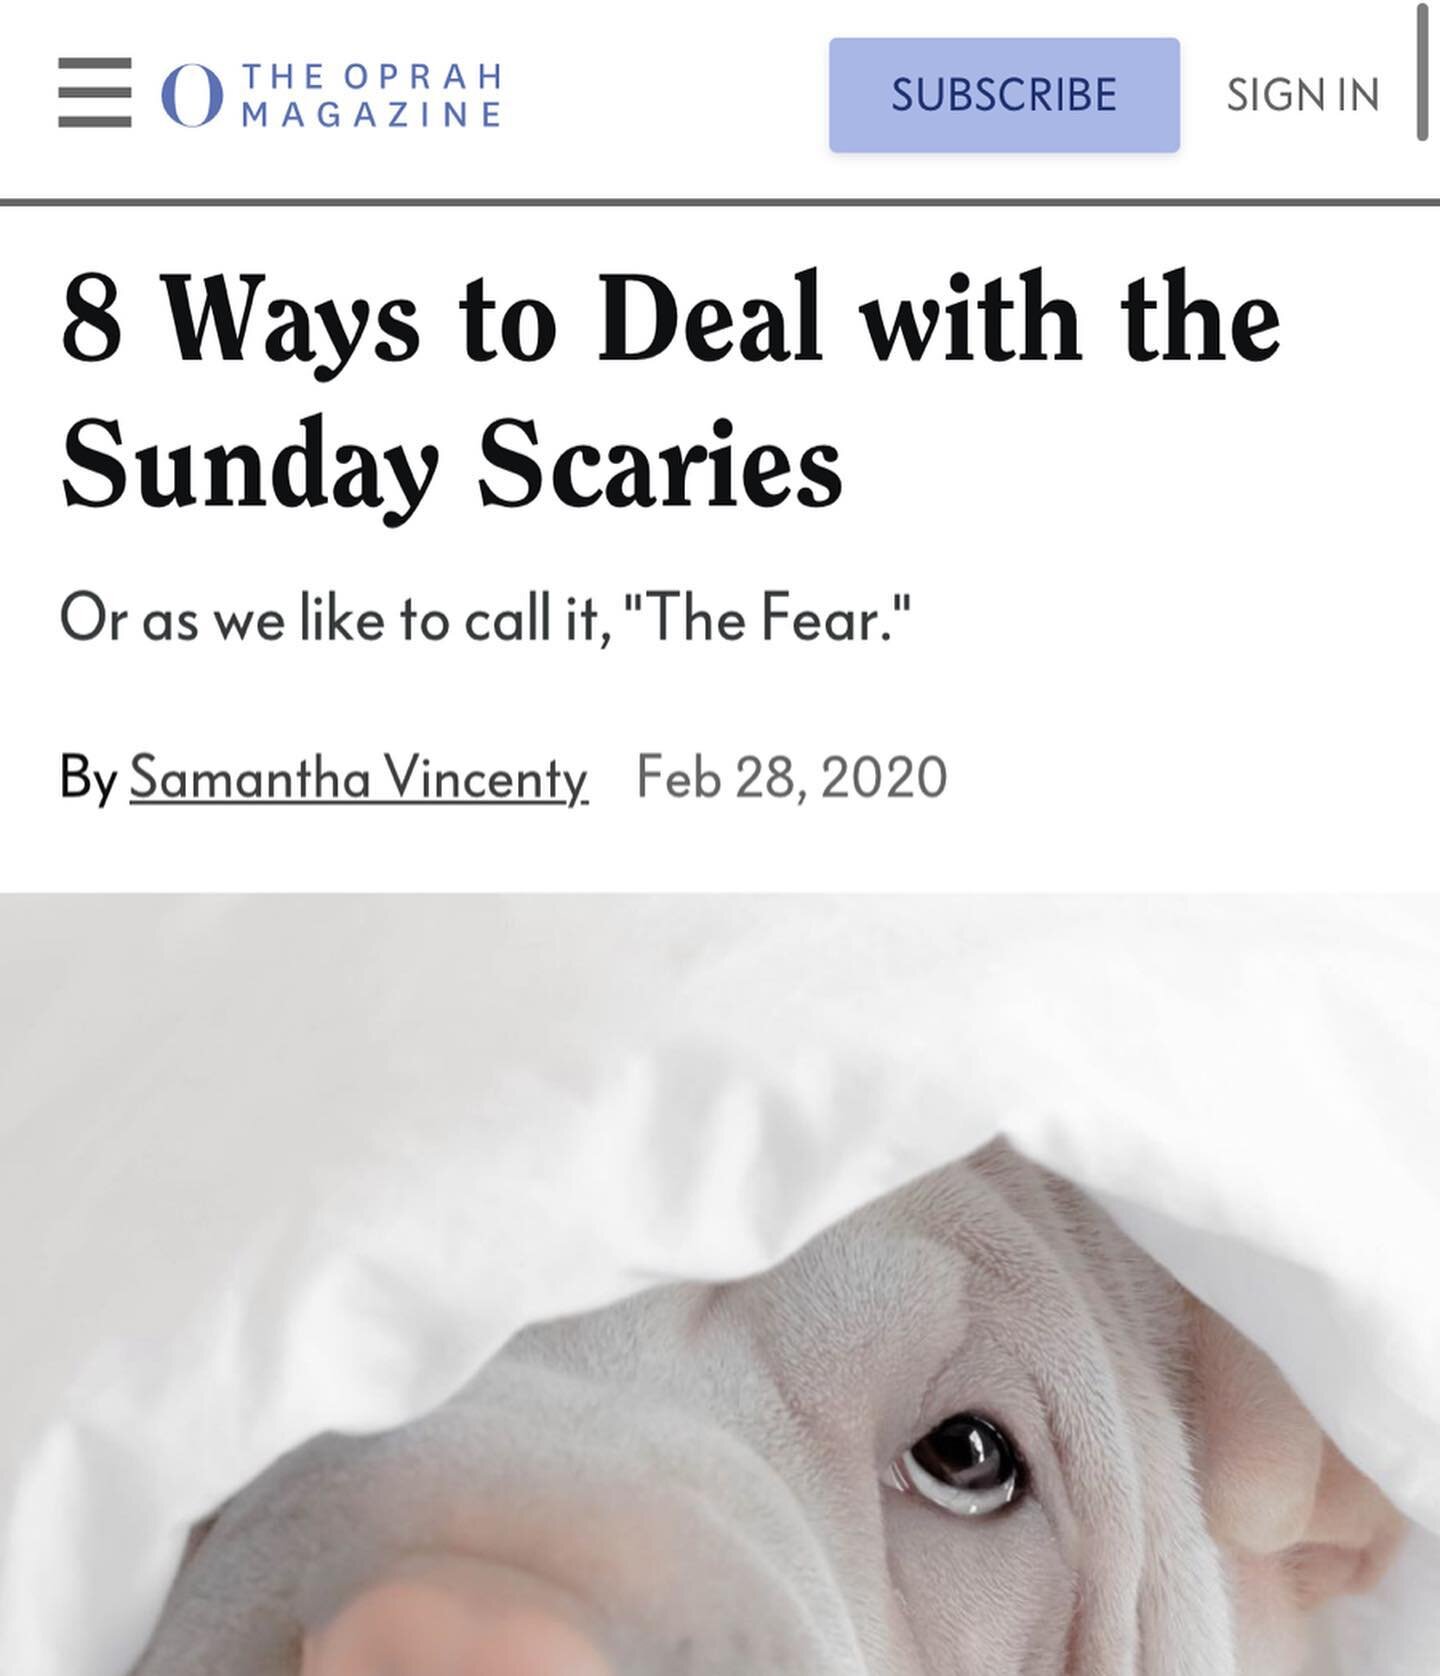 We all know what it feels like to experience that anticipatory anxiety that usually begins to creep in on Sunday afternoons and runs the risk of ruining the latter half of our weekend, makes us feel uneasy and may even set a negative tone for the wee